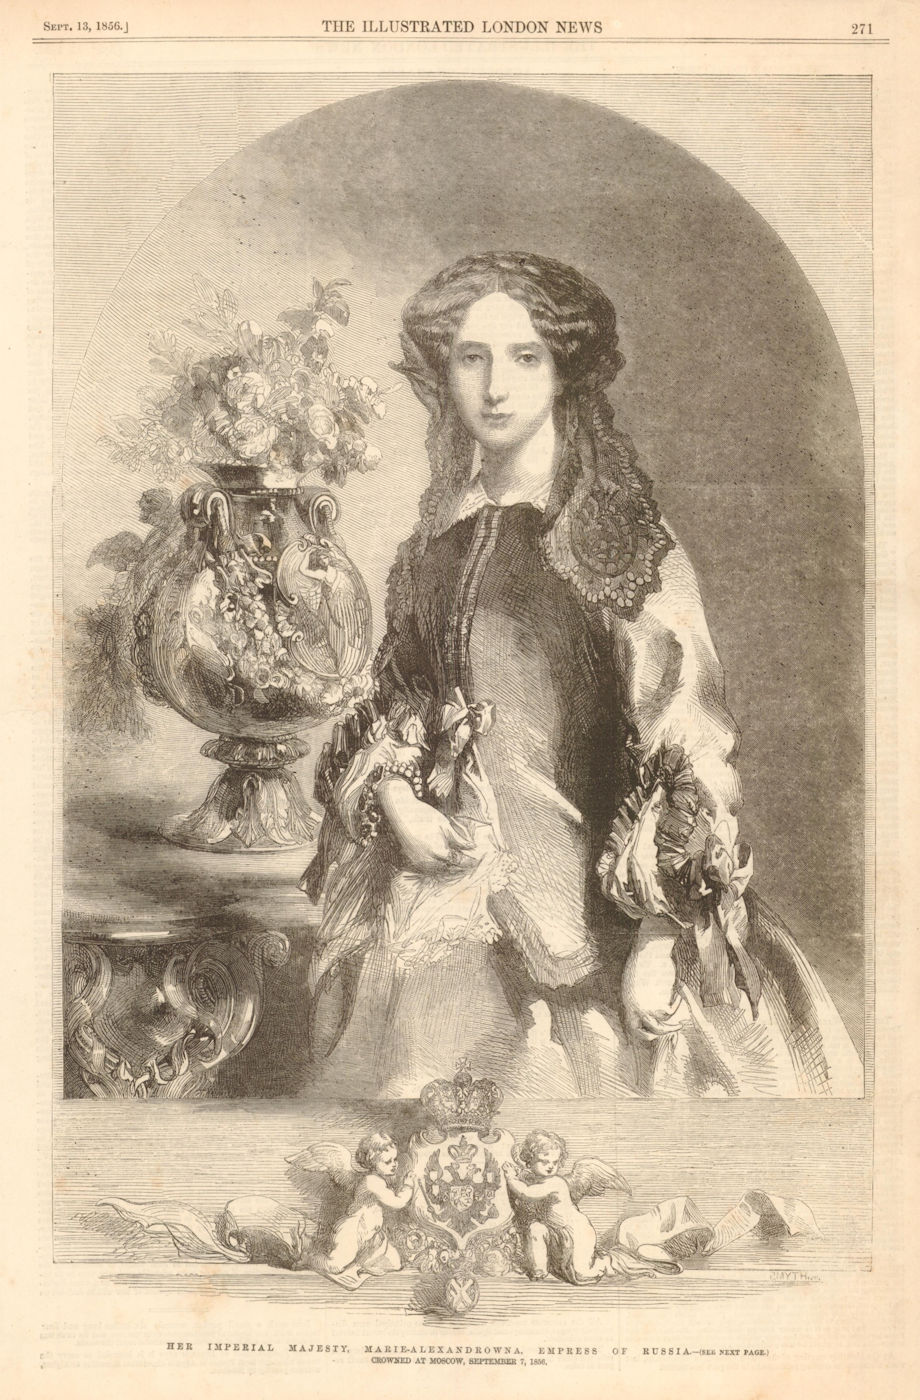 Associate Product Her Imperial Majesty, Marie-Alexandrowna, Empress of Russia 1856 ILN full page